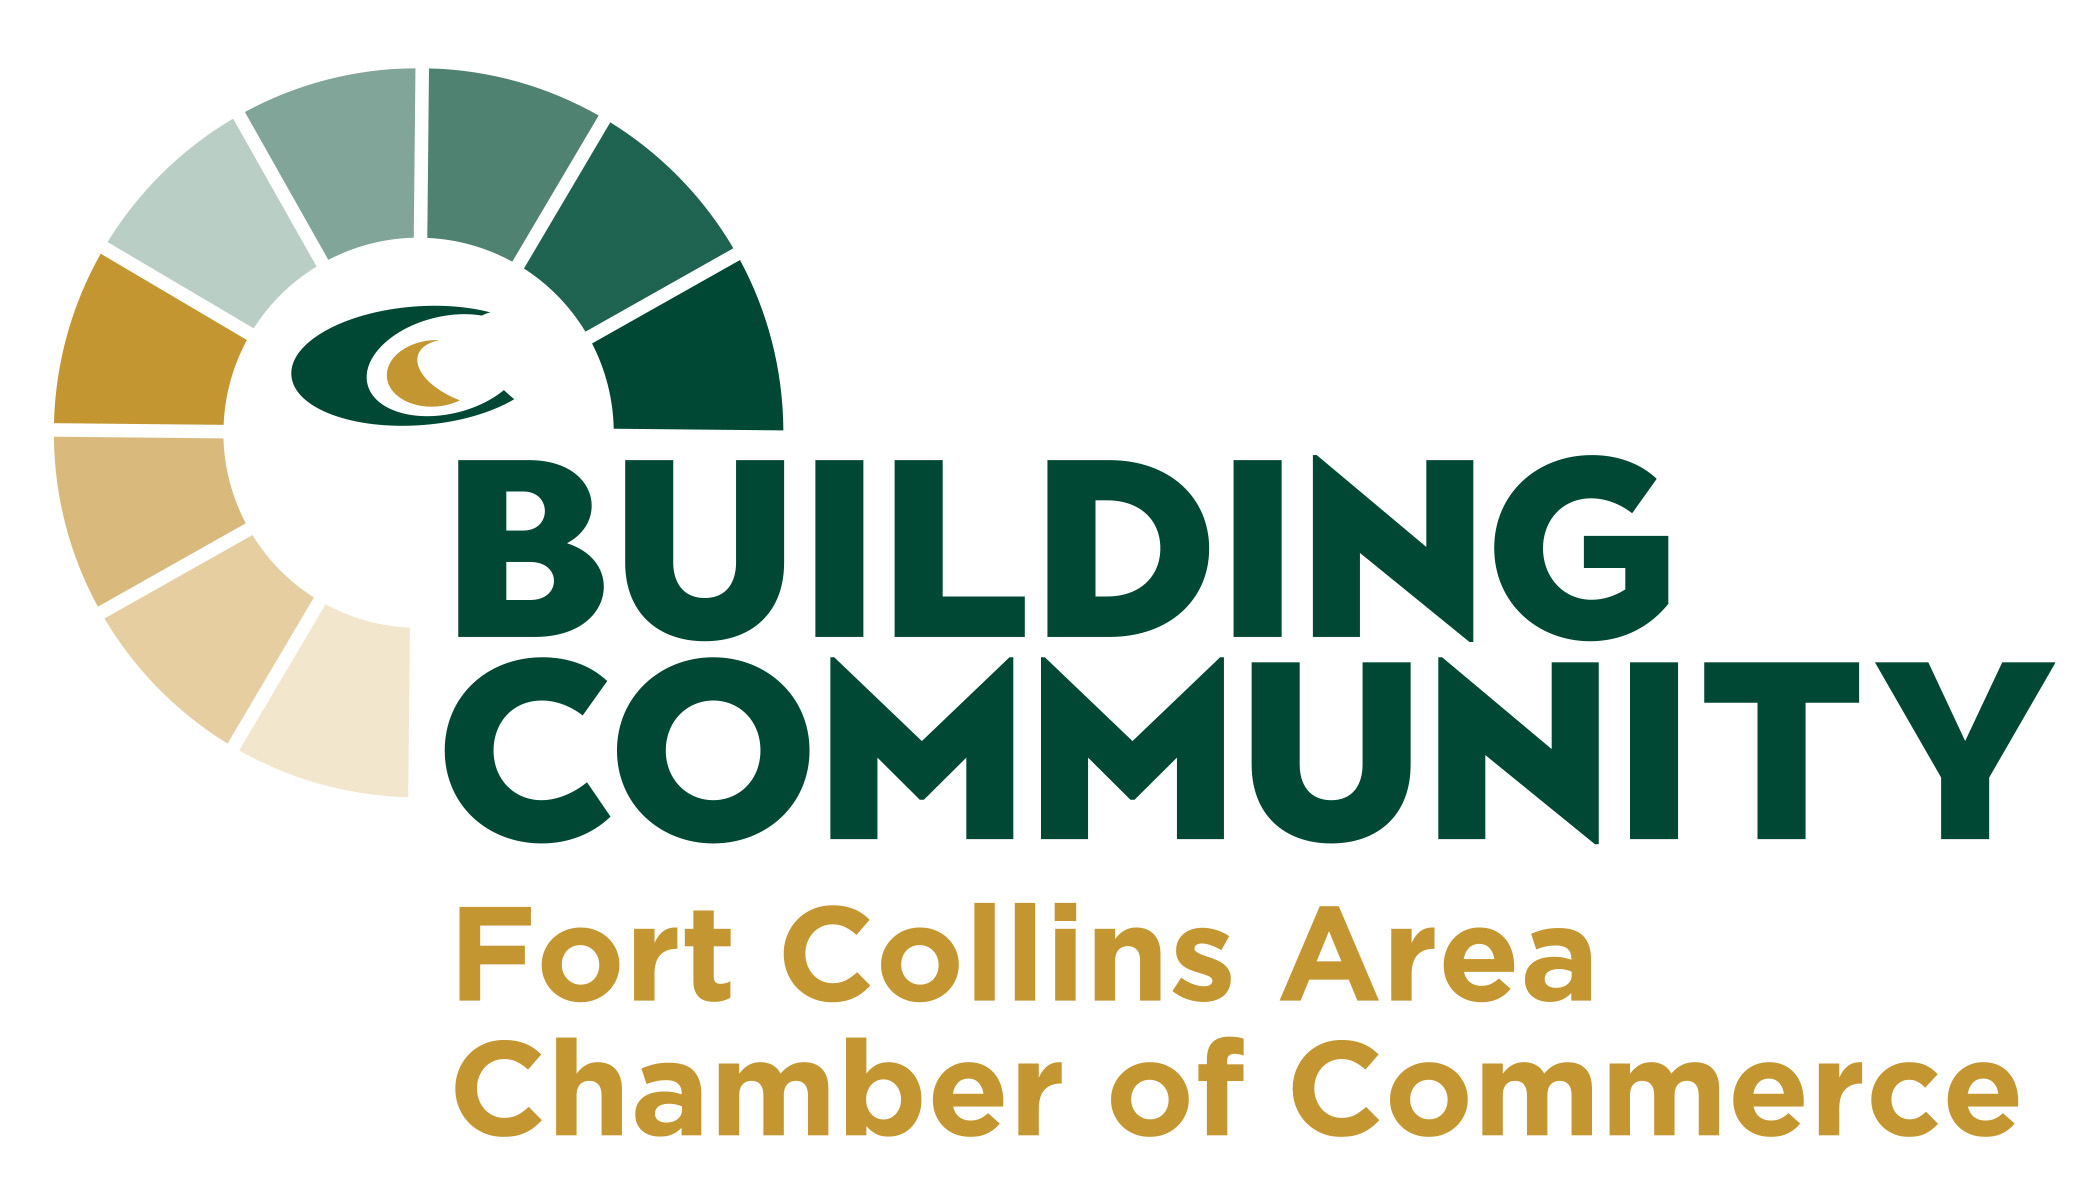 Fort Collins Area Chamber of Commerce